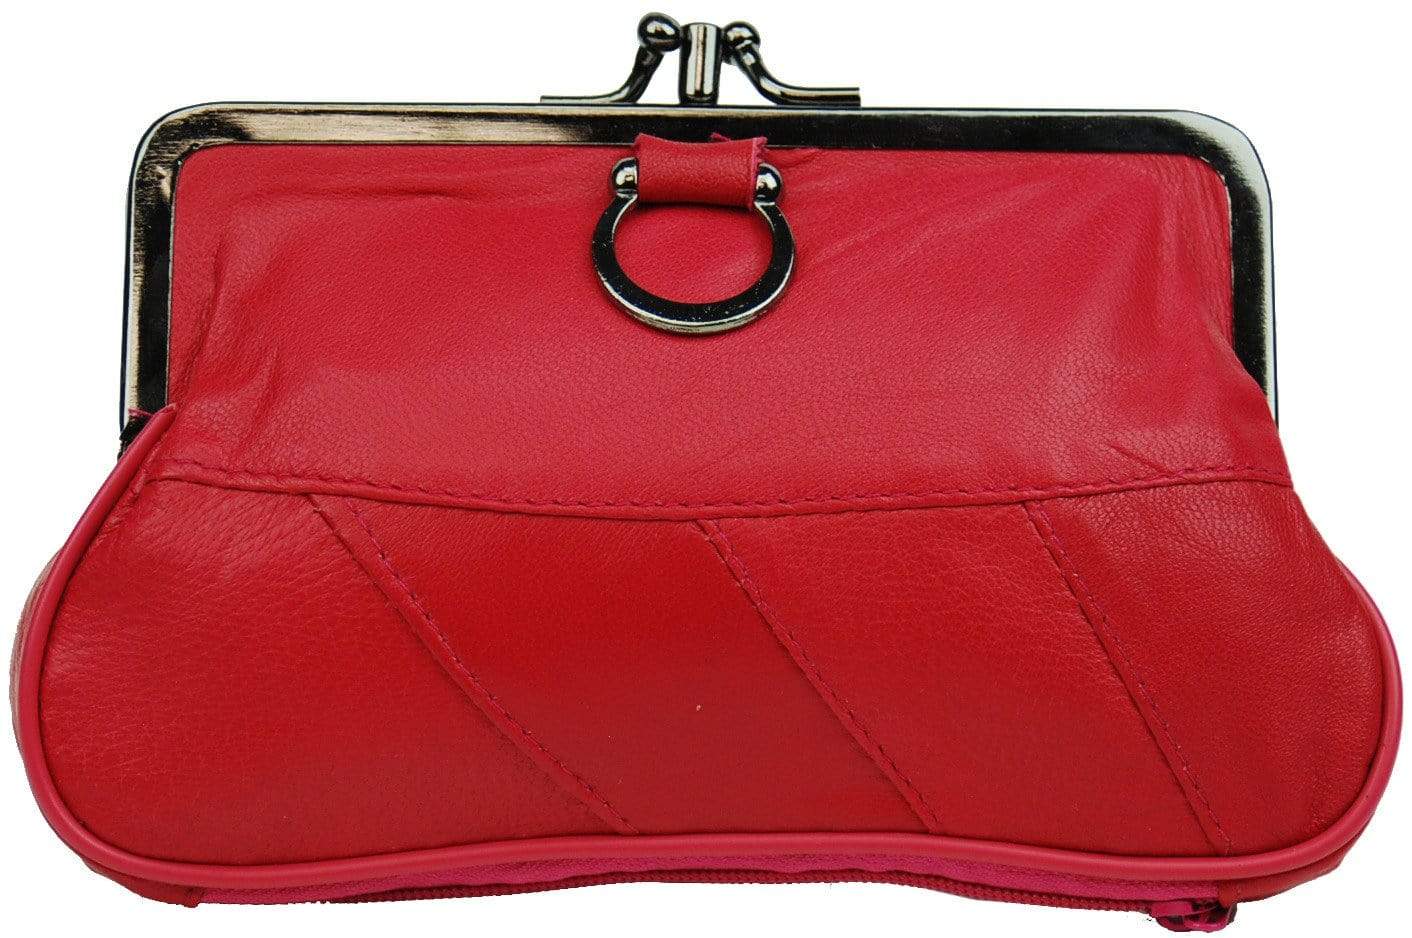 Genuine Leather Change Purse with Clasp Closure 11-3016 (C) 